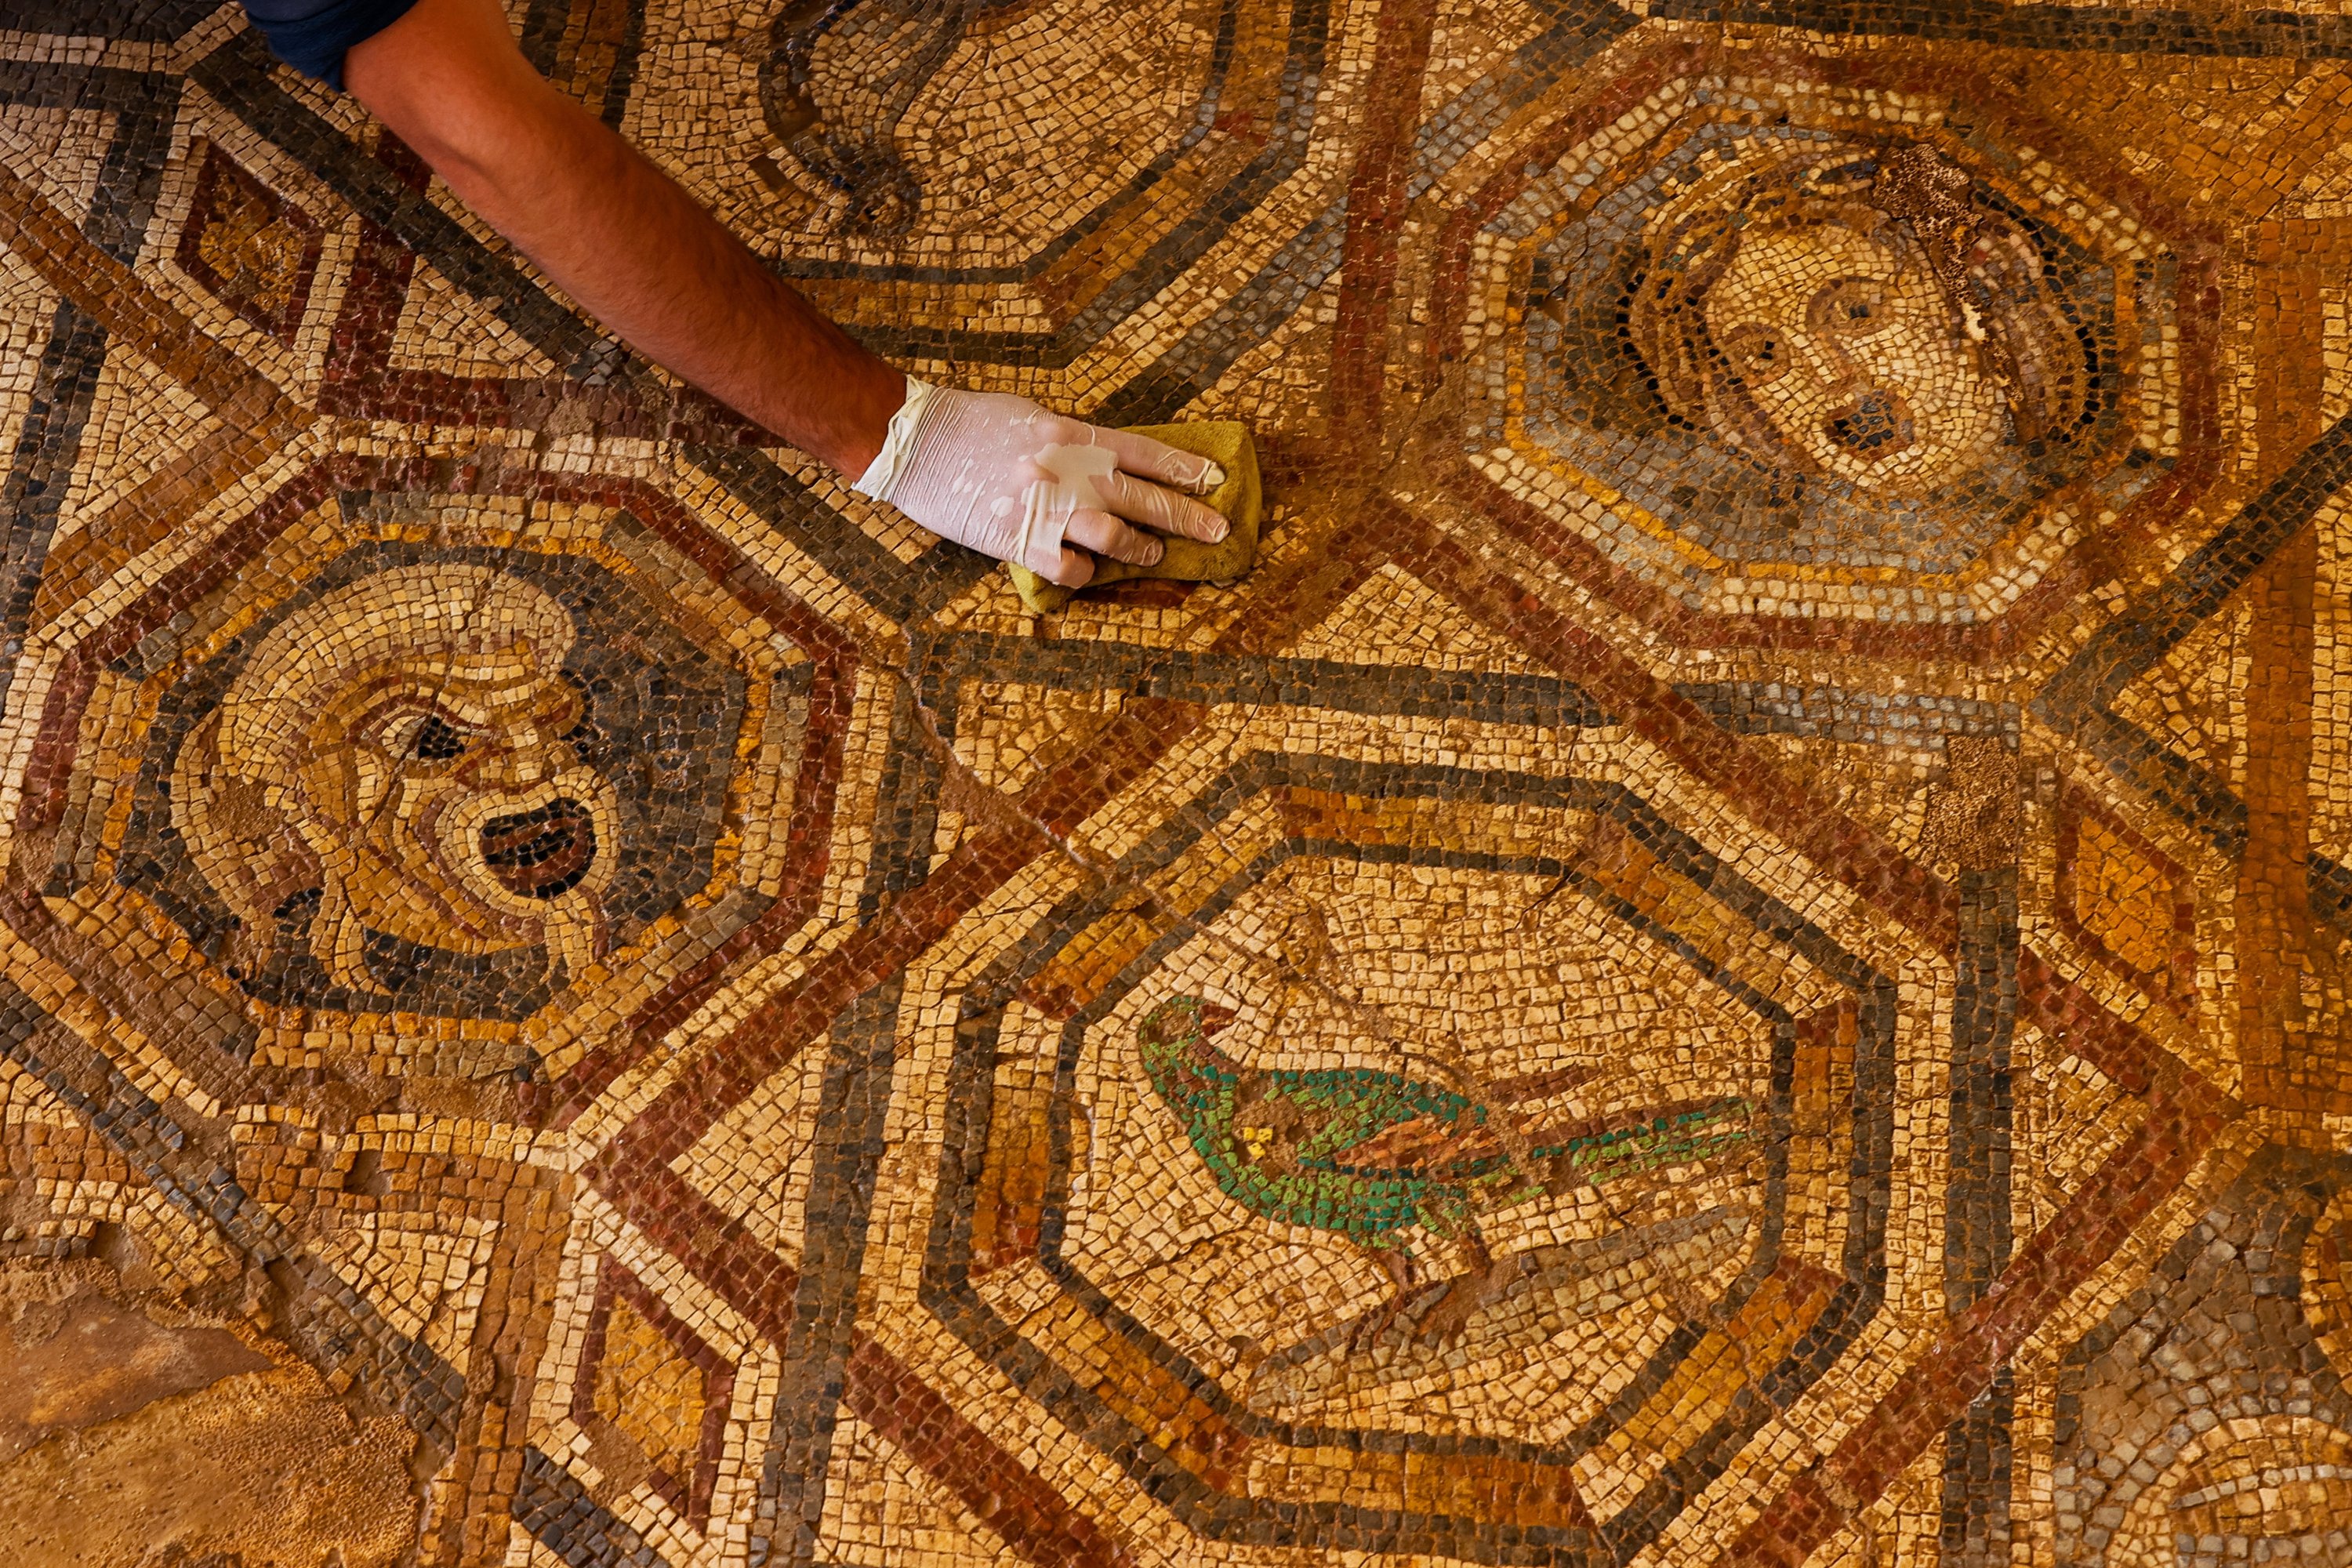 A restorer works on a mosaic in the ancient city of Metropolis, Izmir, western Turkey, Oct. 12, 2021. (AA Photo) 